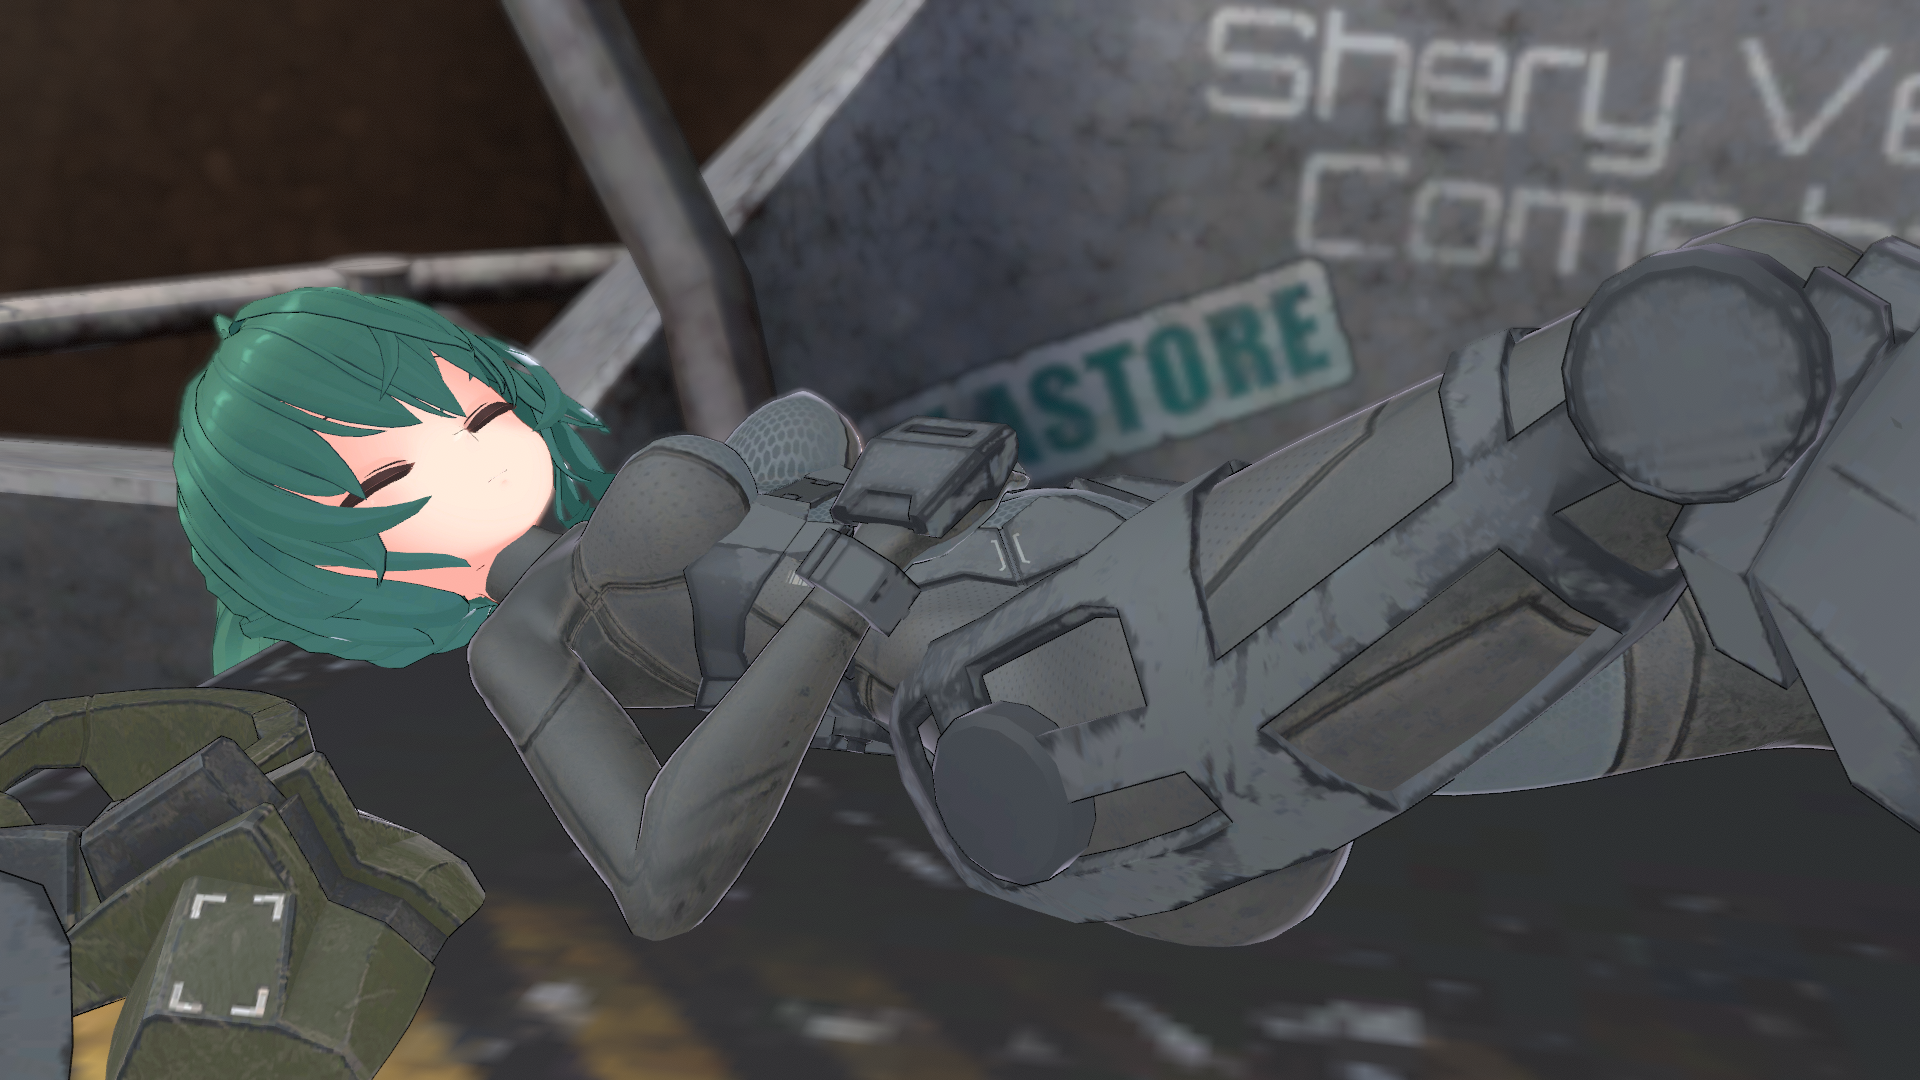 VRChat_1920x1080_2021-12-05_04-16-04.916.png